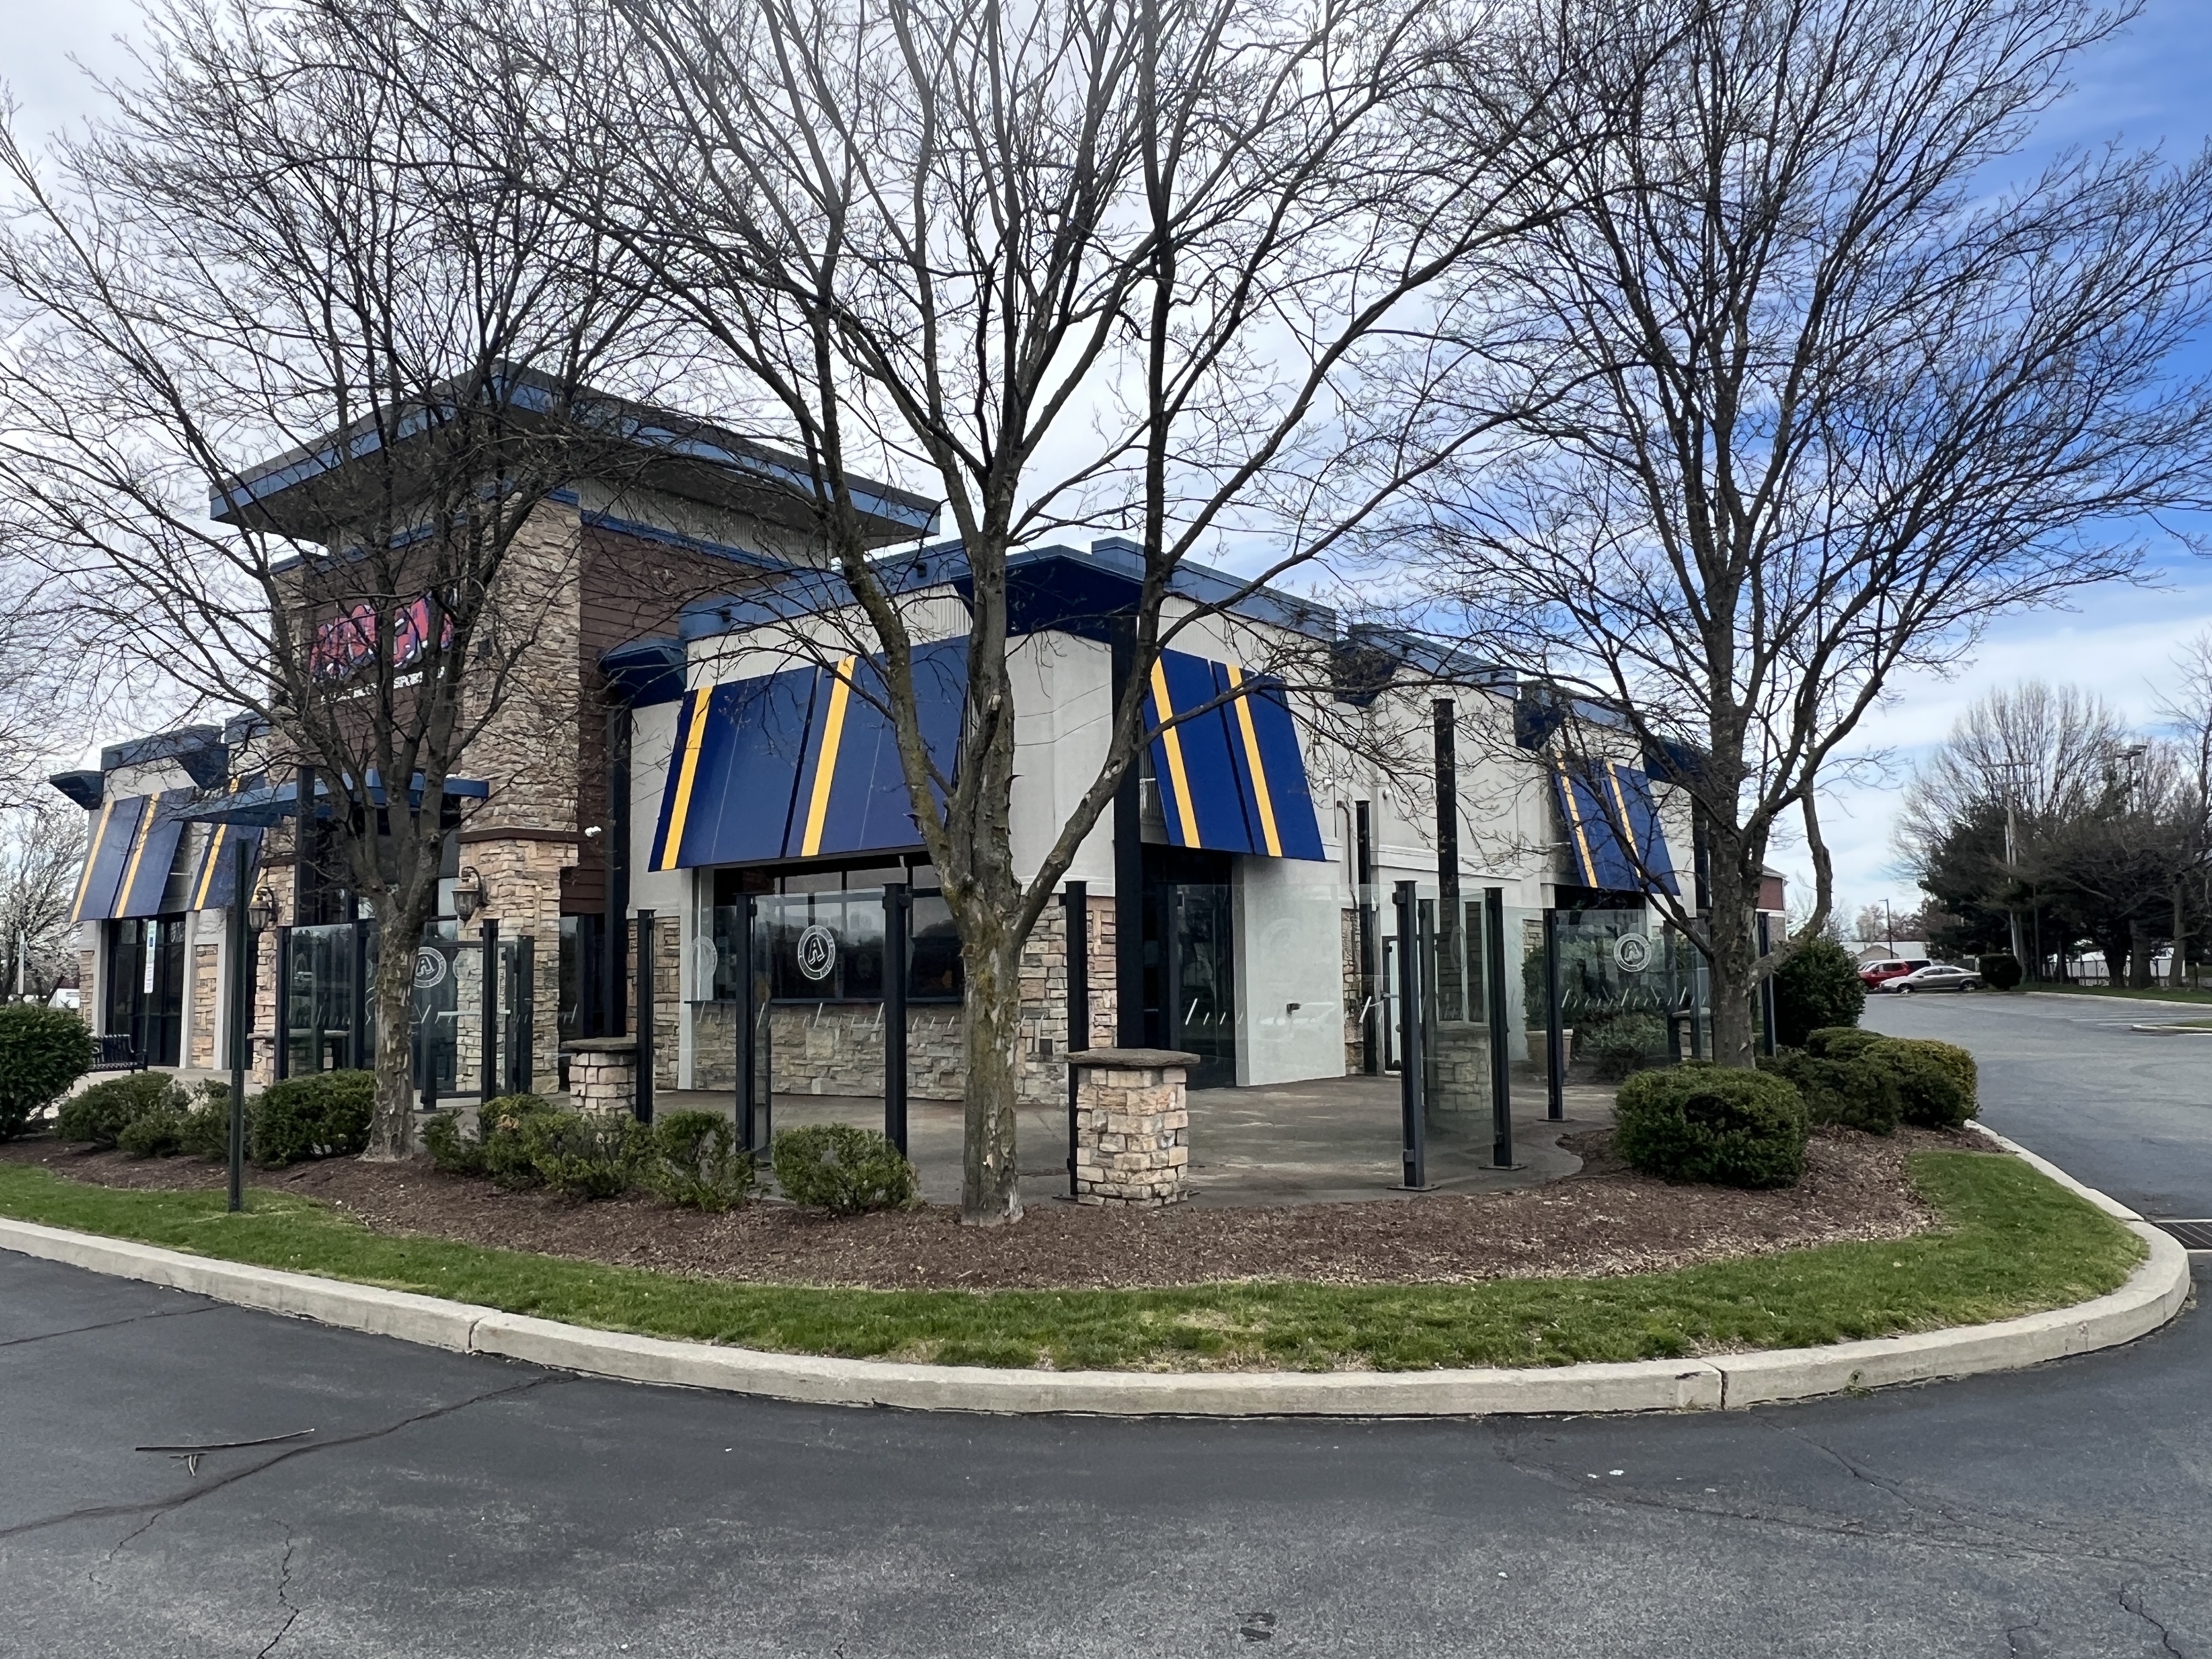 327 Star Rd, Allentown, Pennsylvania 18106, ,Retail,For Sale and For Lease,327 Star Rd,1085